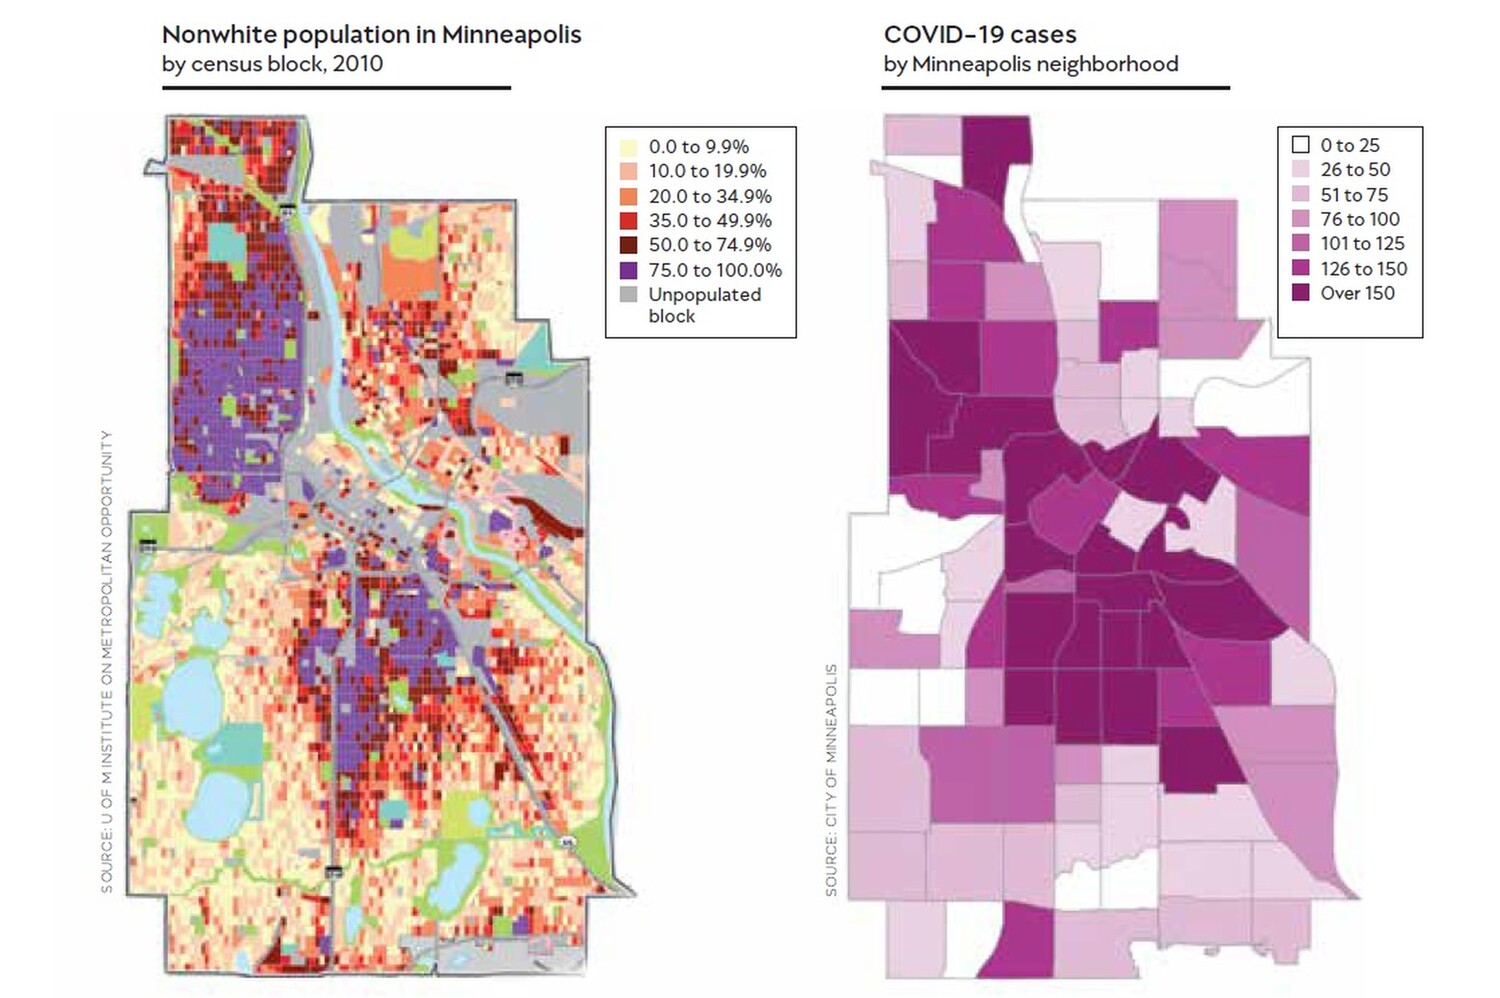 Two maps of Minneapolis showing nonwhite population by block and COVID-19 cases by neighborhood